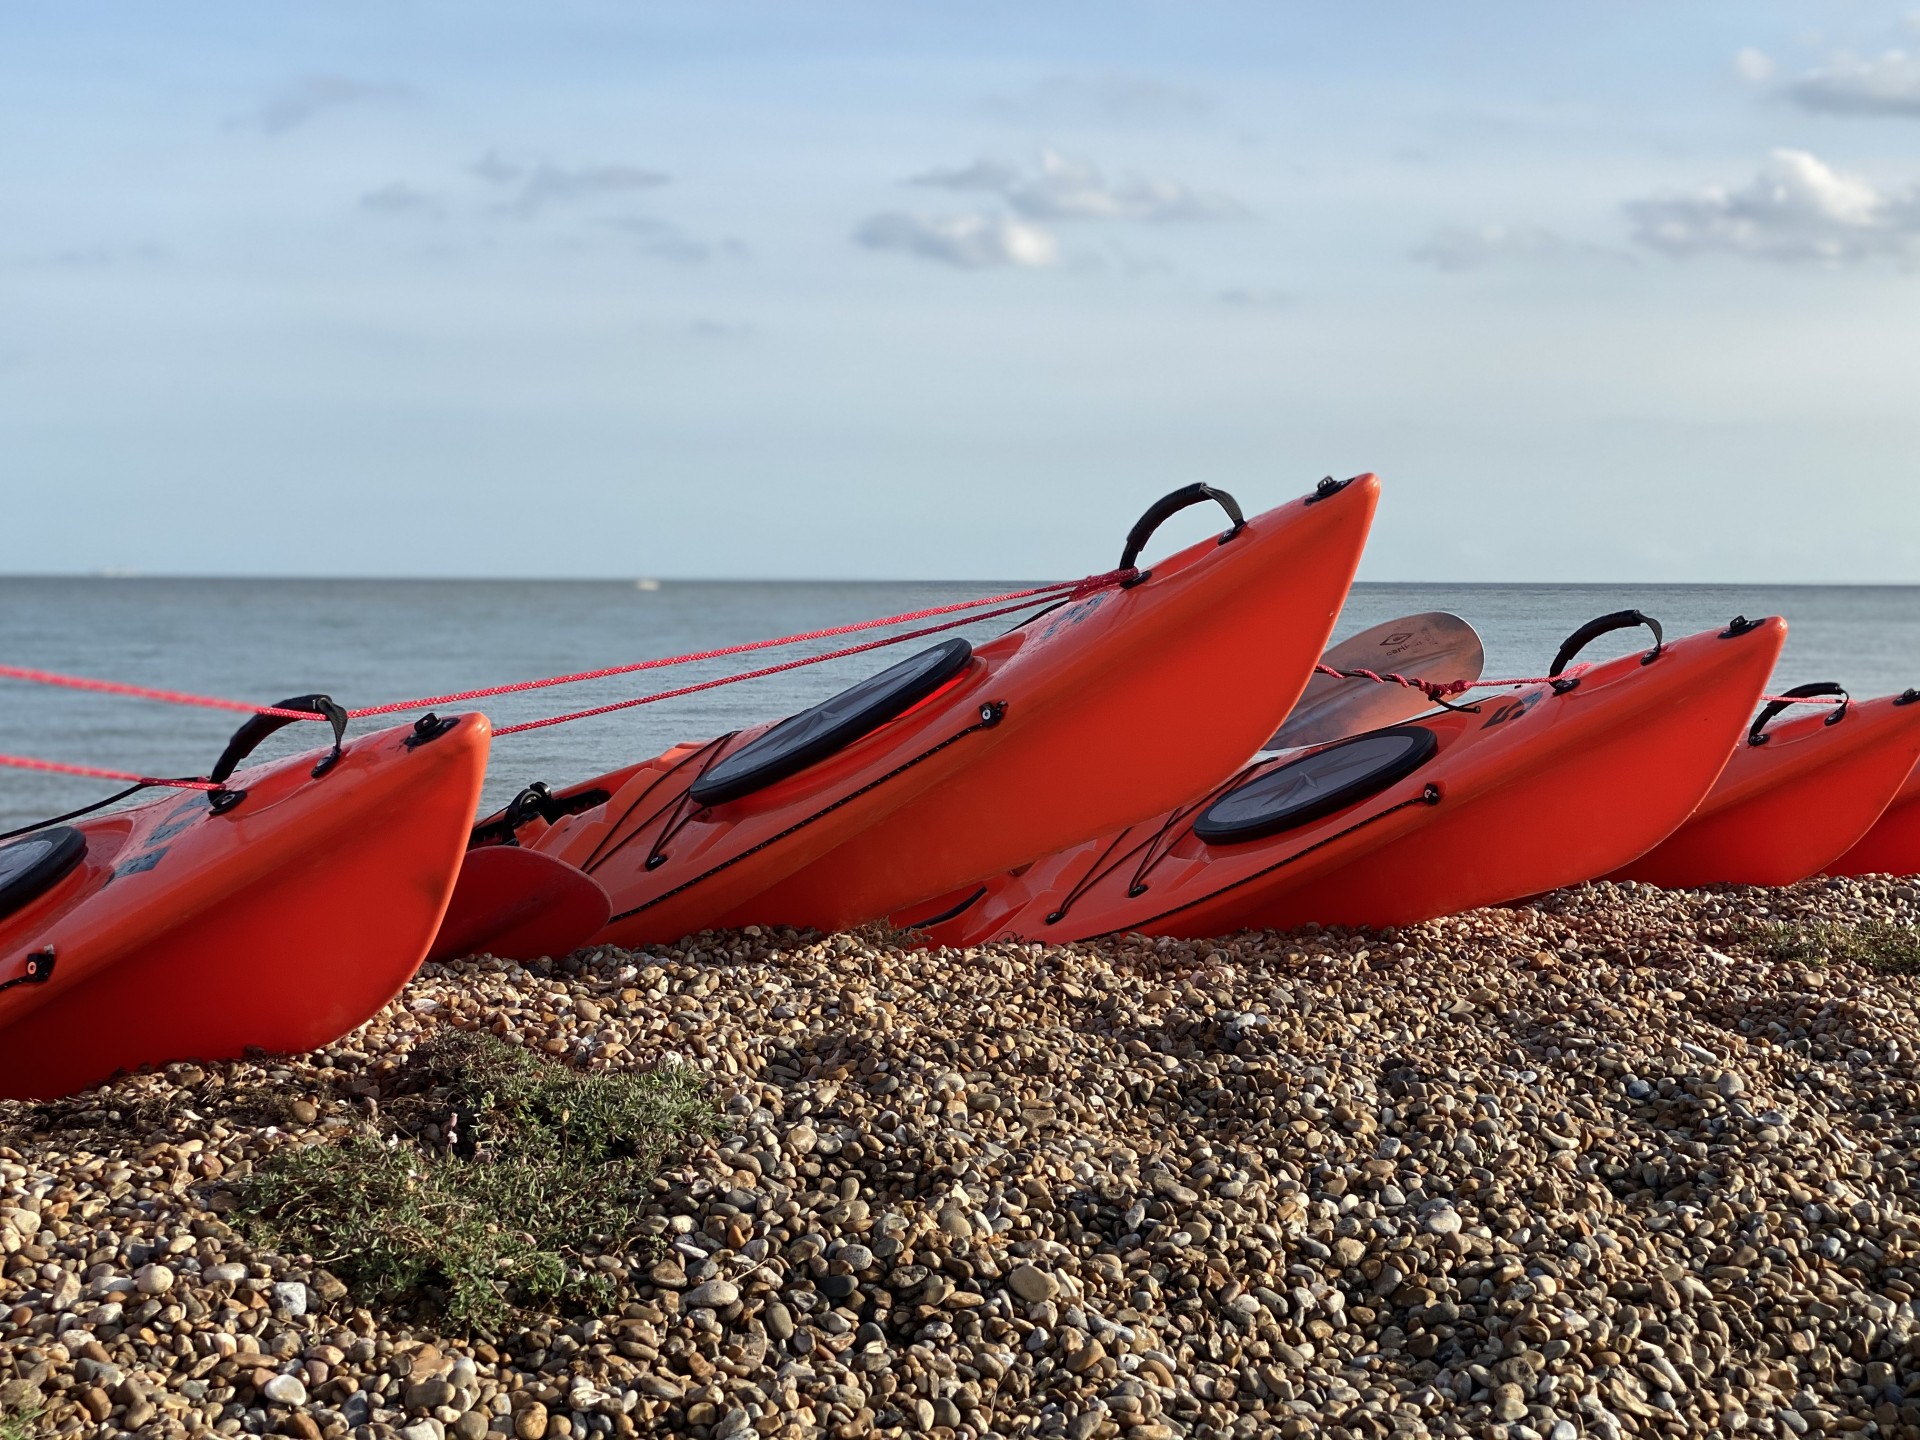 Orange kayaks on the beach ready for launch.